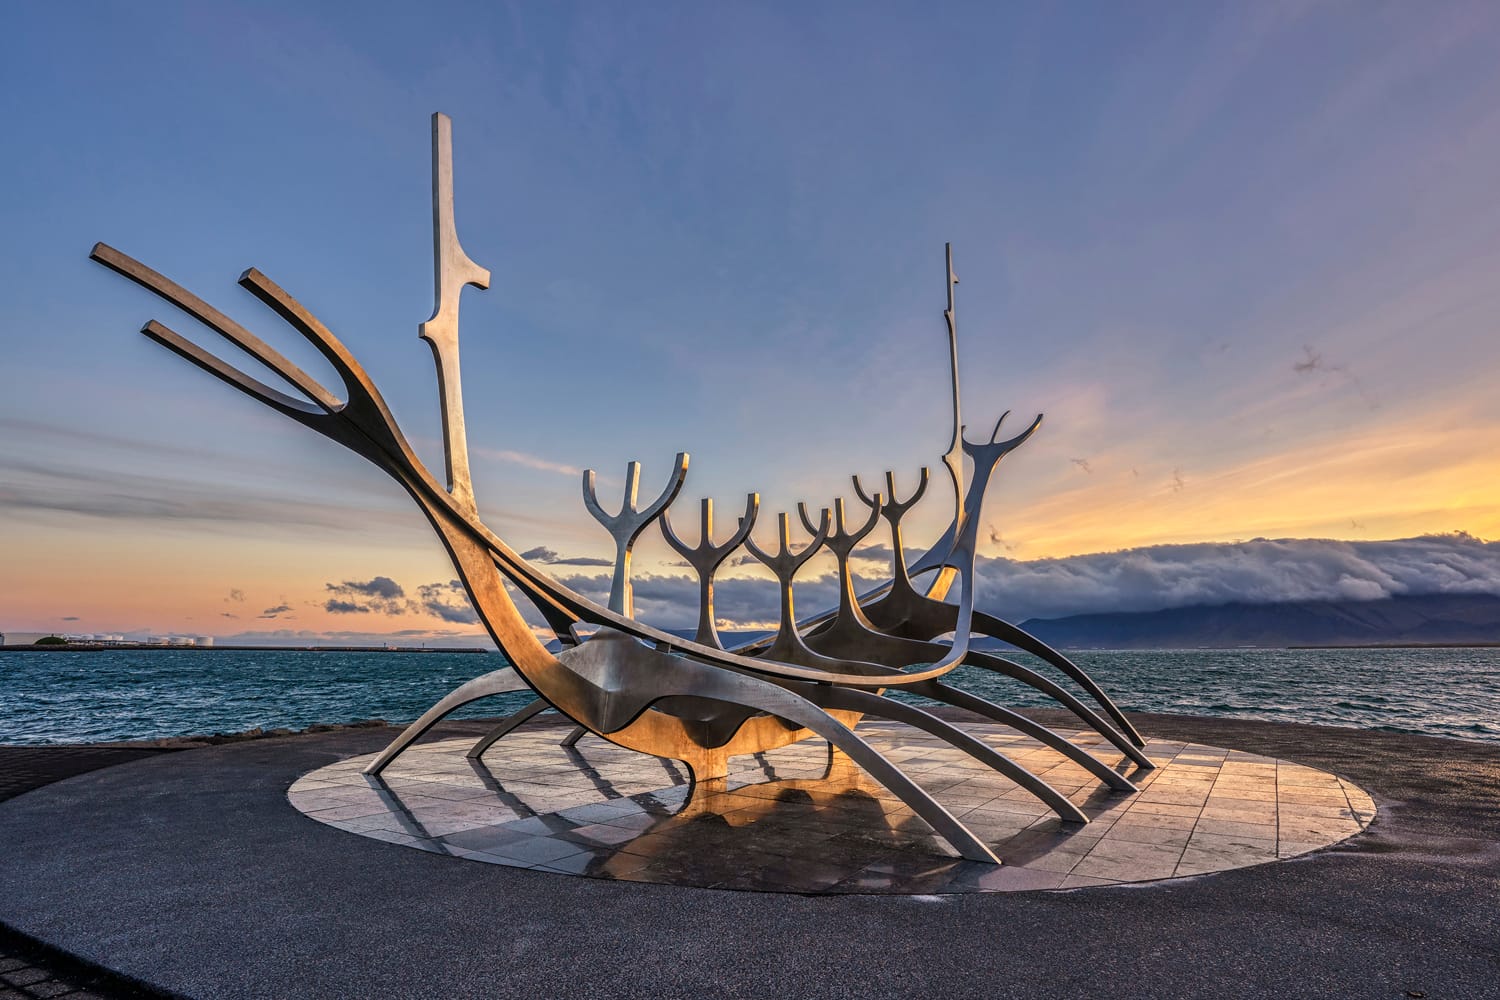 Sunrise at the iconic Sun Voyager sculpture in Reykjavik, Iceland.